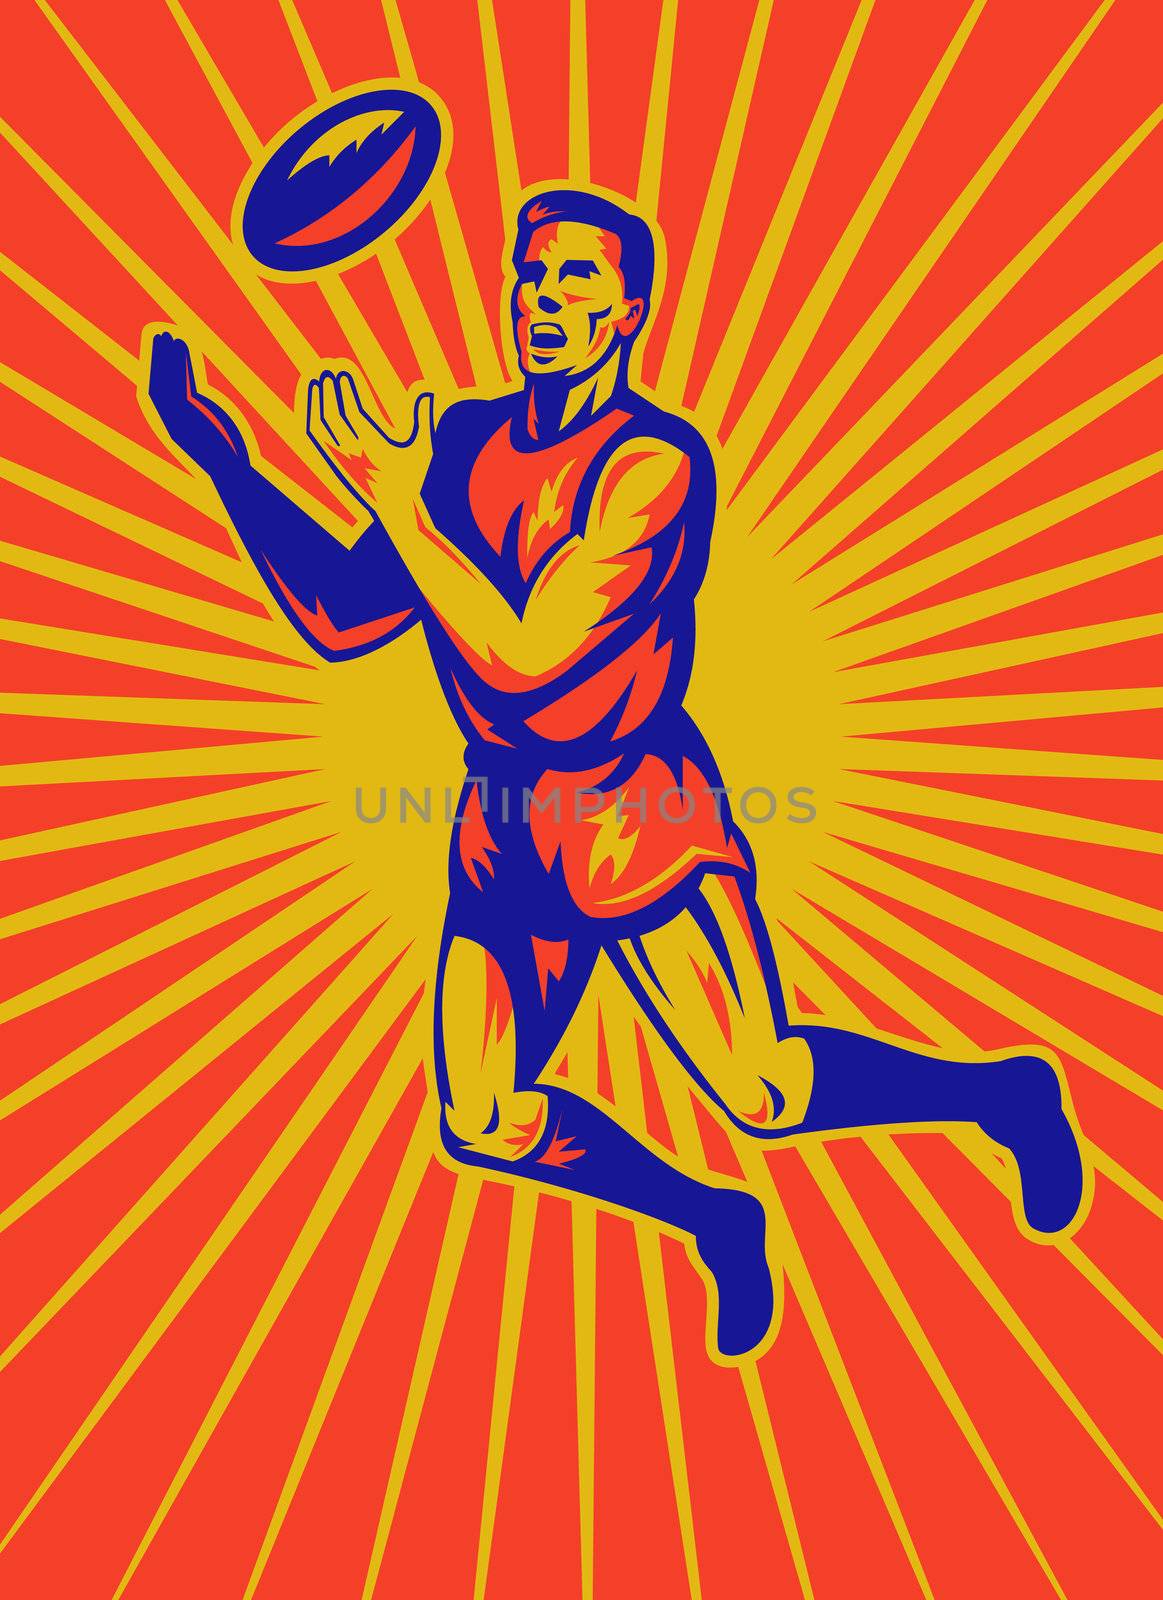 illustration of an aussie rules player jumping catching ball done in retro woodcut style.